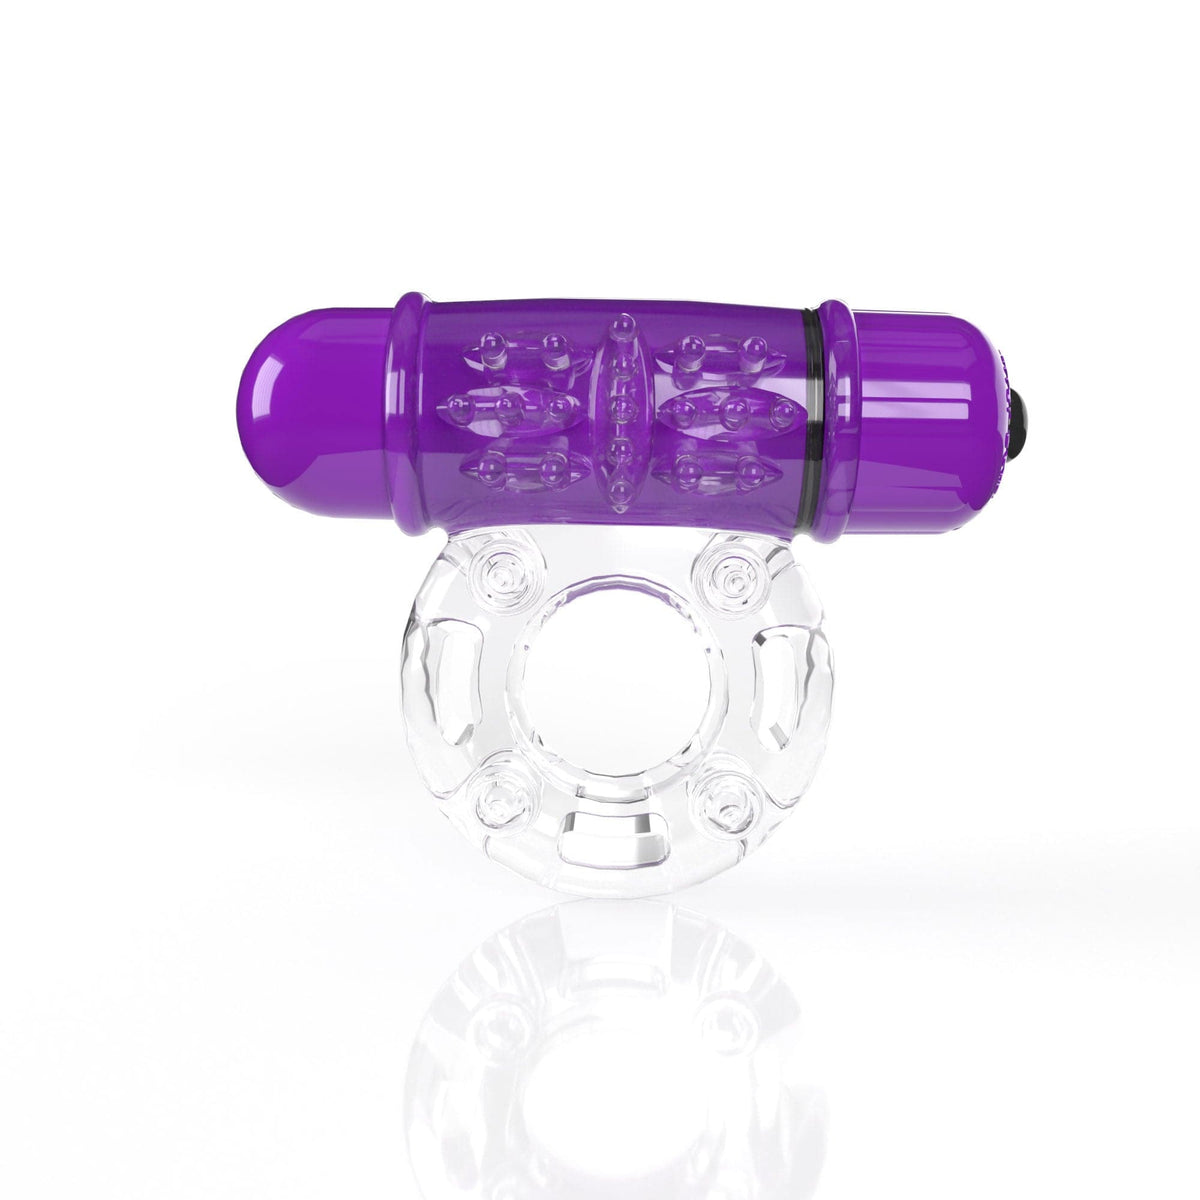 screaming o 4t owow super powered vibrating ring grape